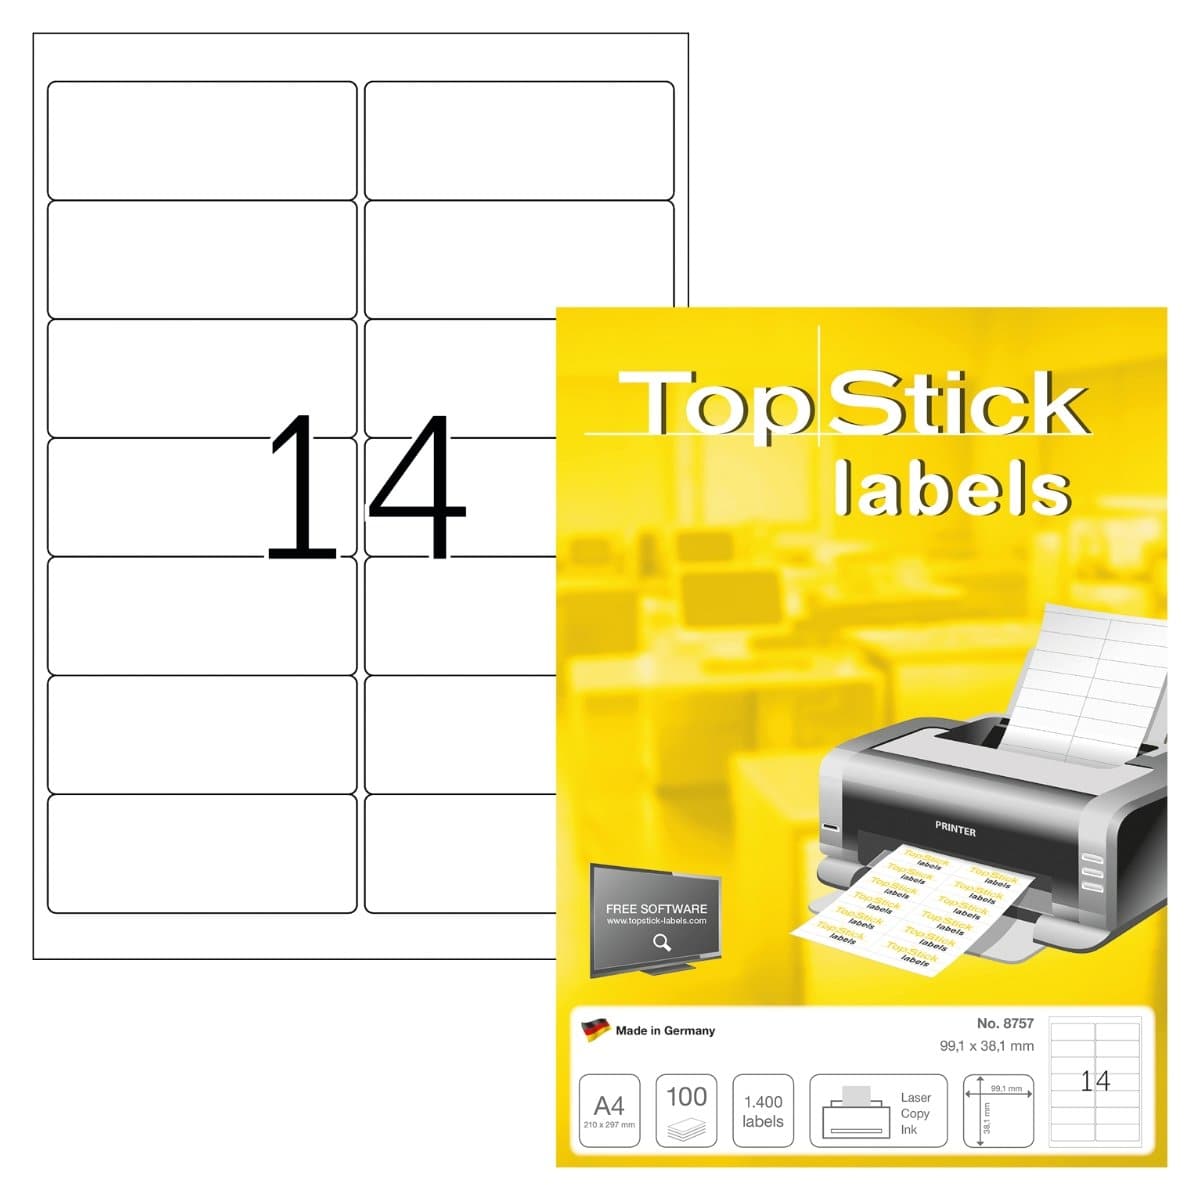 TopStick labels 14 labels/sheet, round corners, 99.1 x 38.1 mm, 100sheets/pack, White